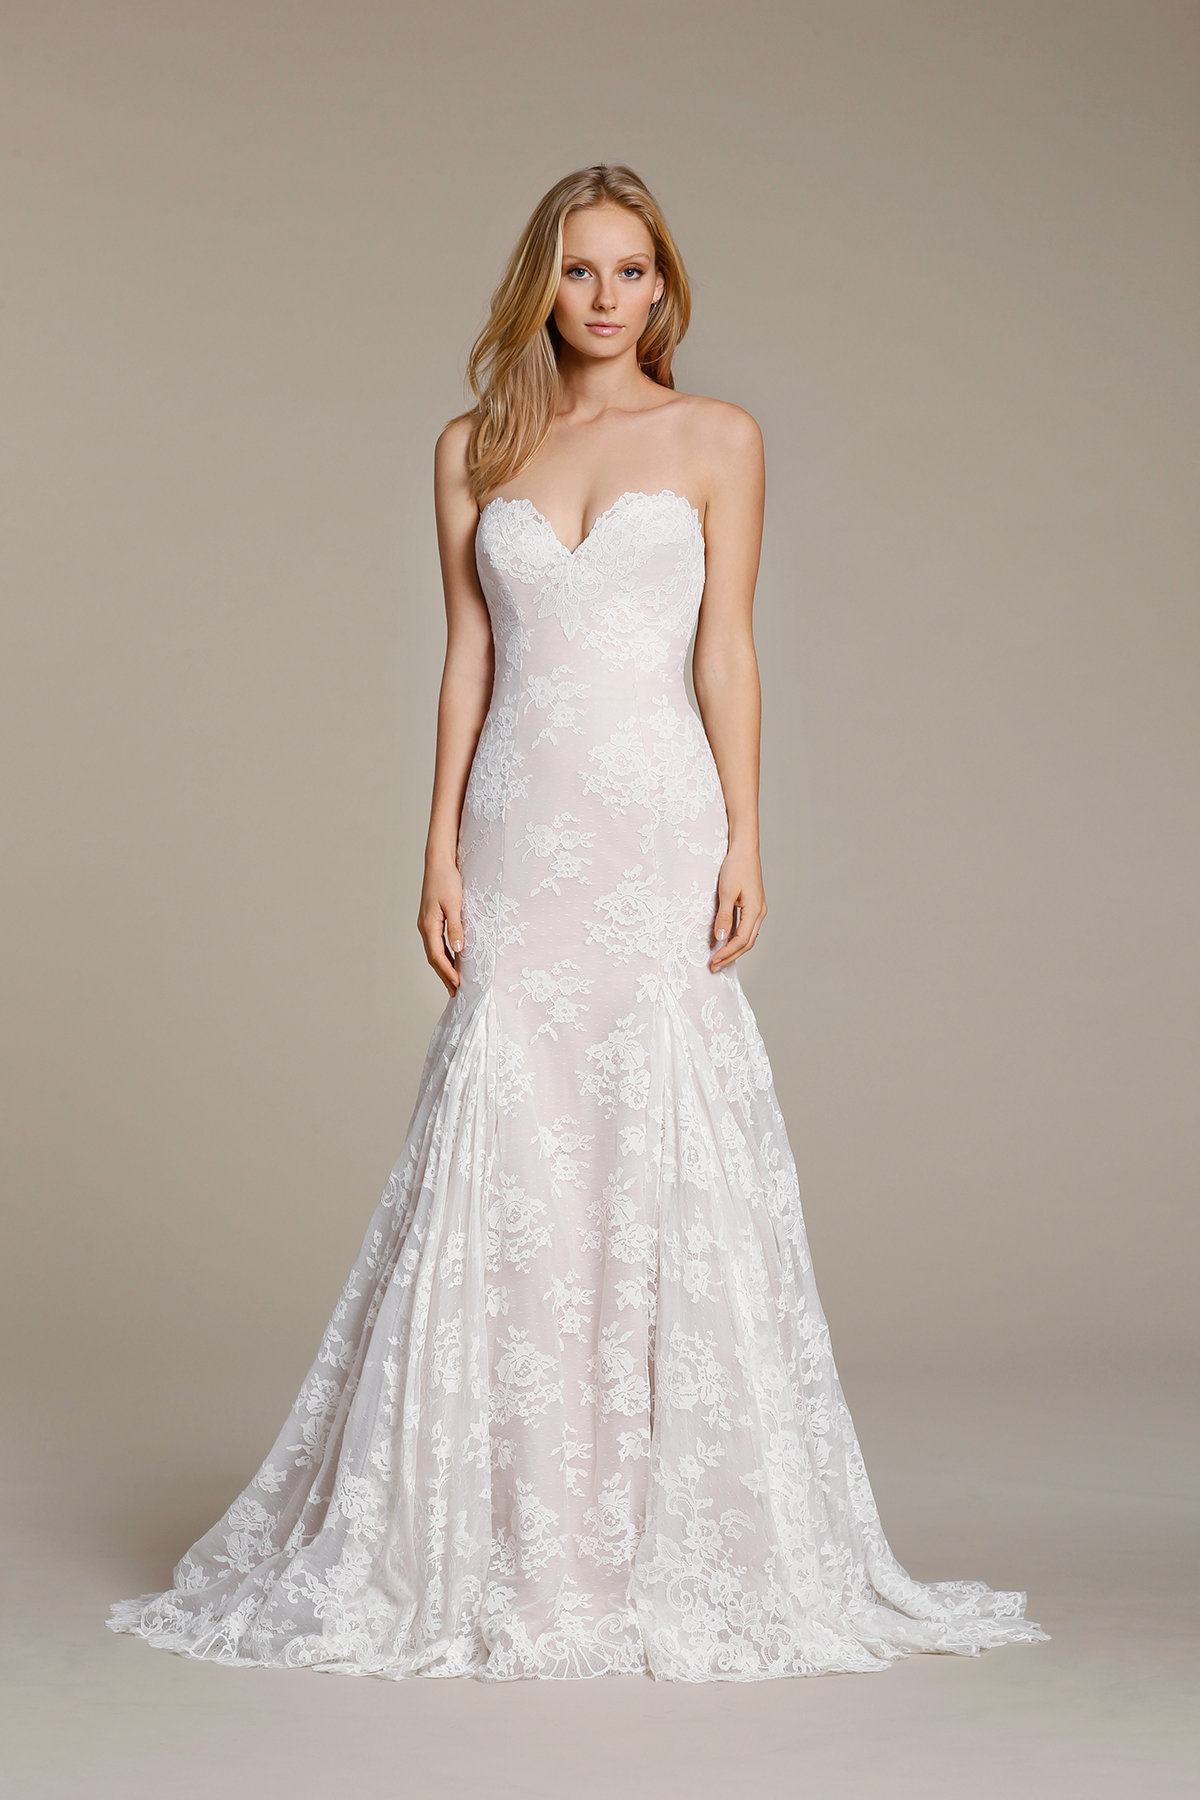 19+ Fit And Flair Wedding Dress